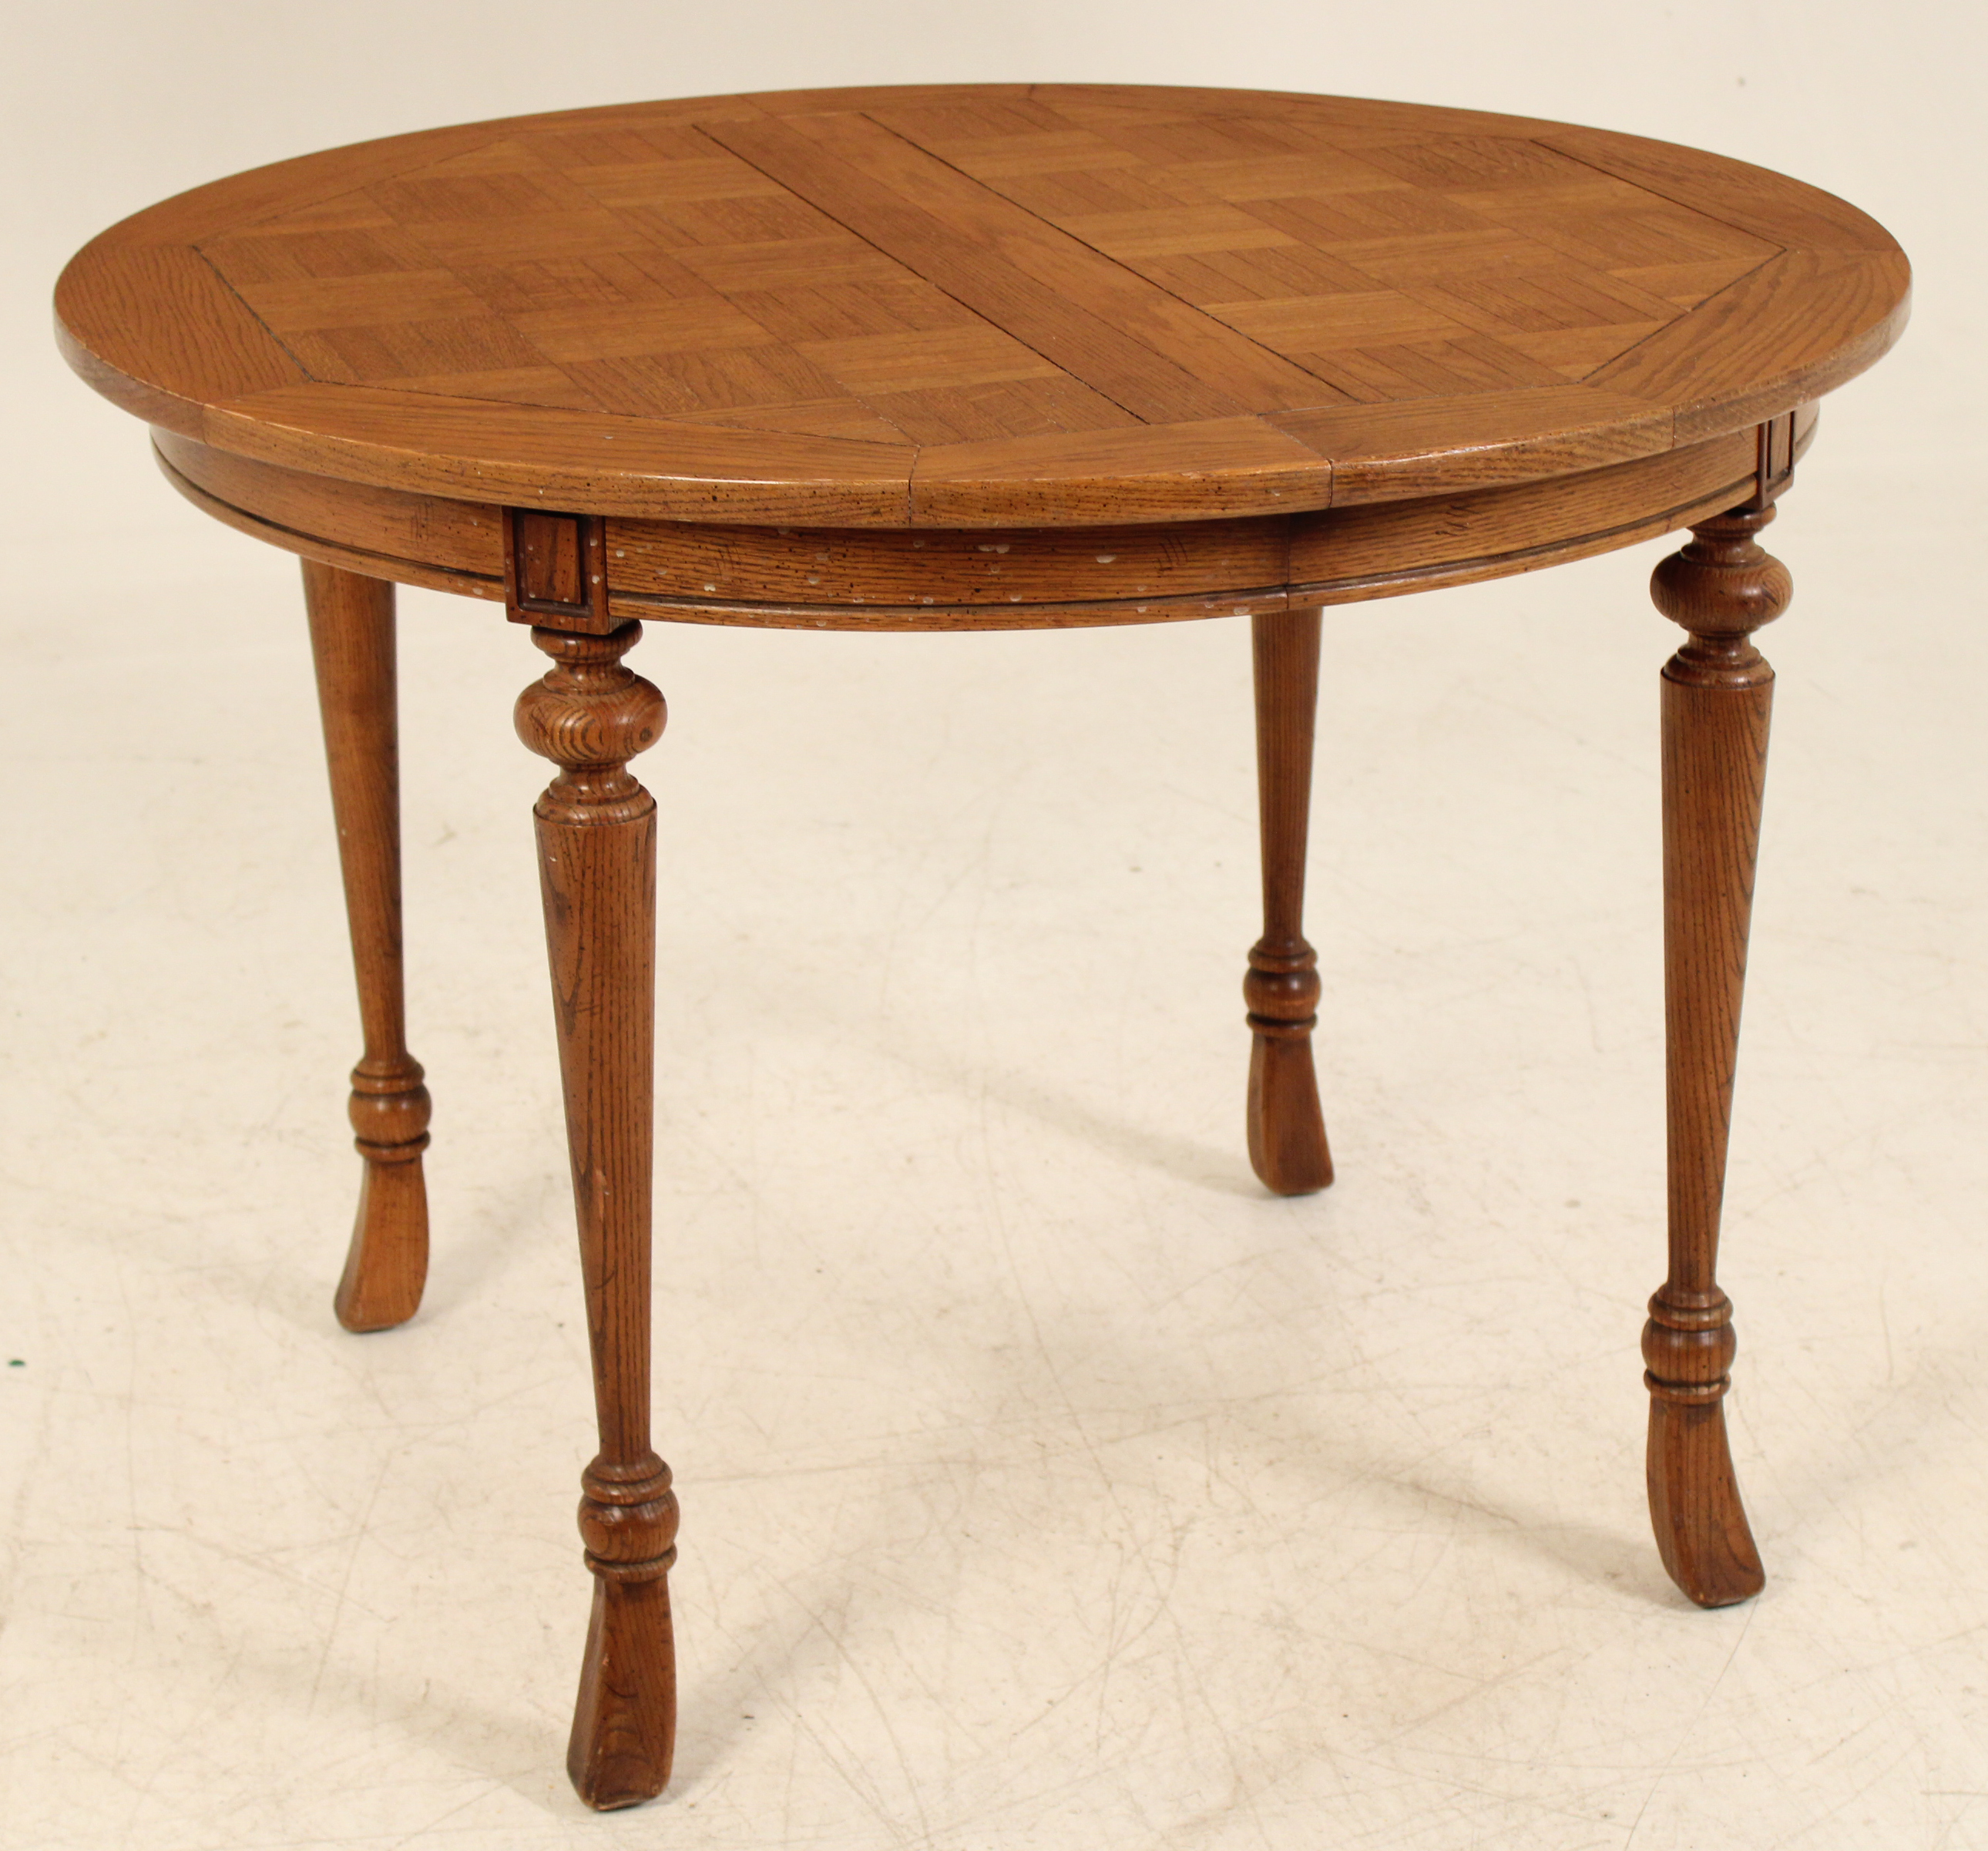 COUNTRY FRENCH ROUND OAK TABLE 35ec1e